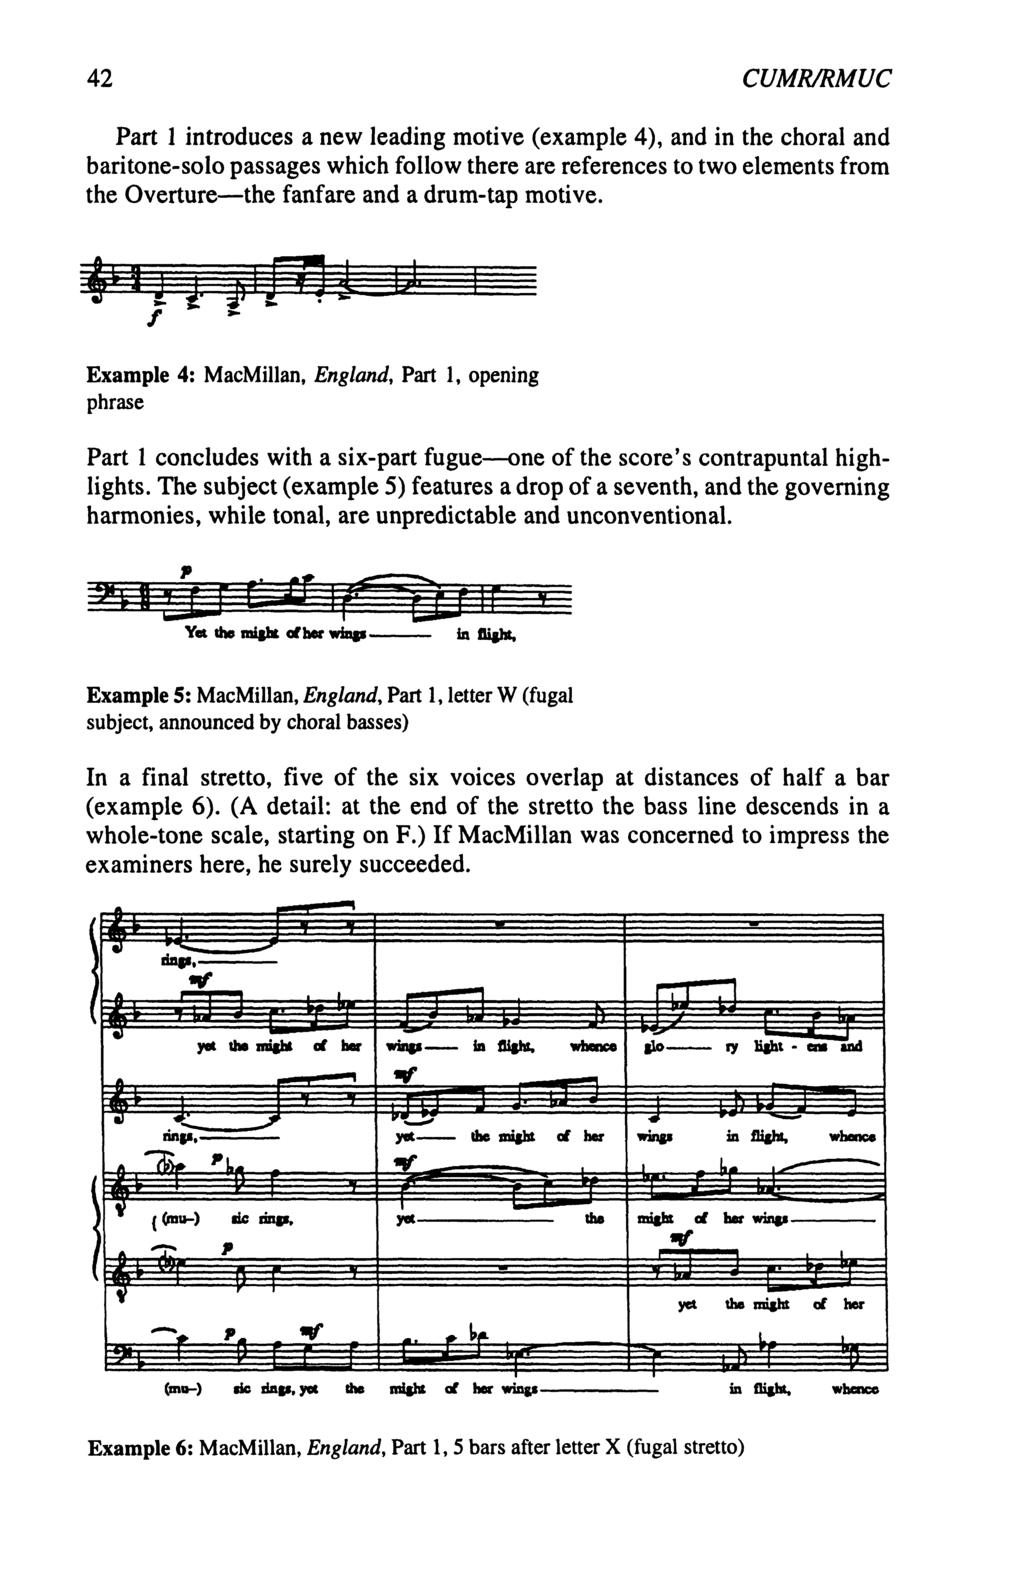 42 CUMR/RMUC Part 1 introduces a new leading motive (example 4), and in the choral and baritone-solo passages which follow there are references to two elements from the Overture the fanfare and a